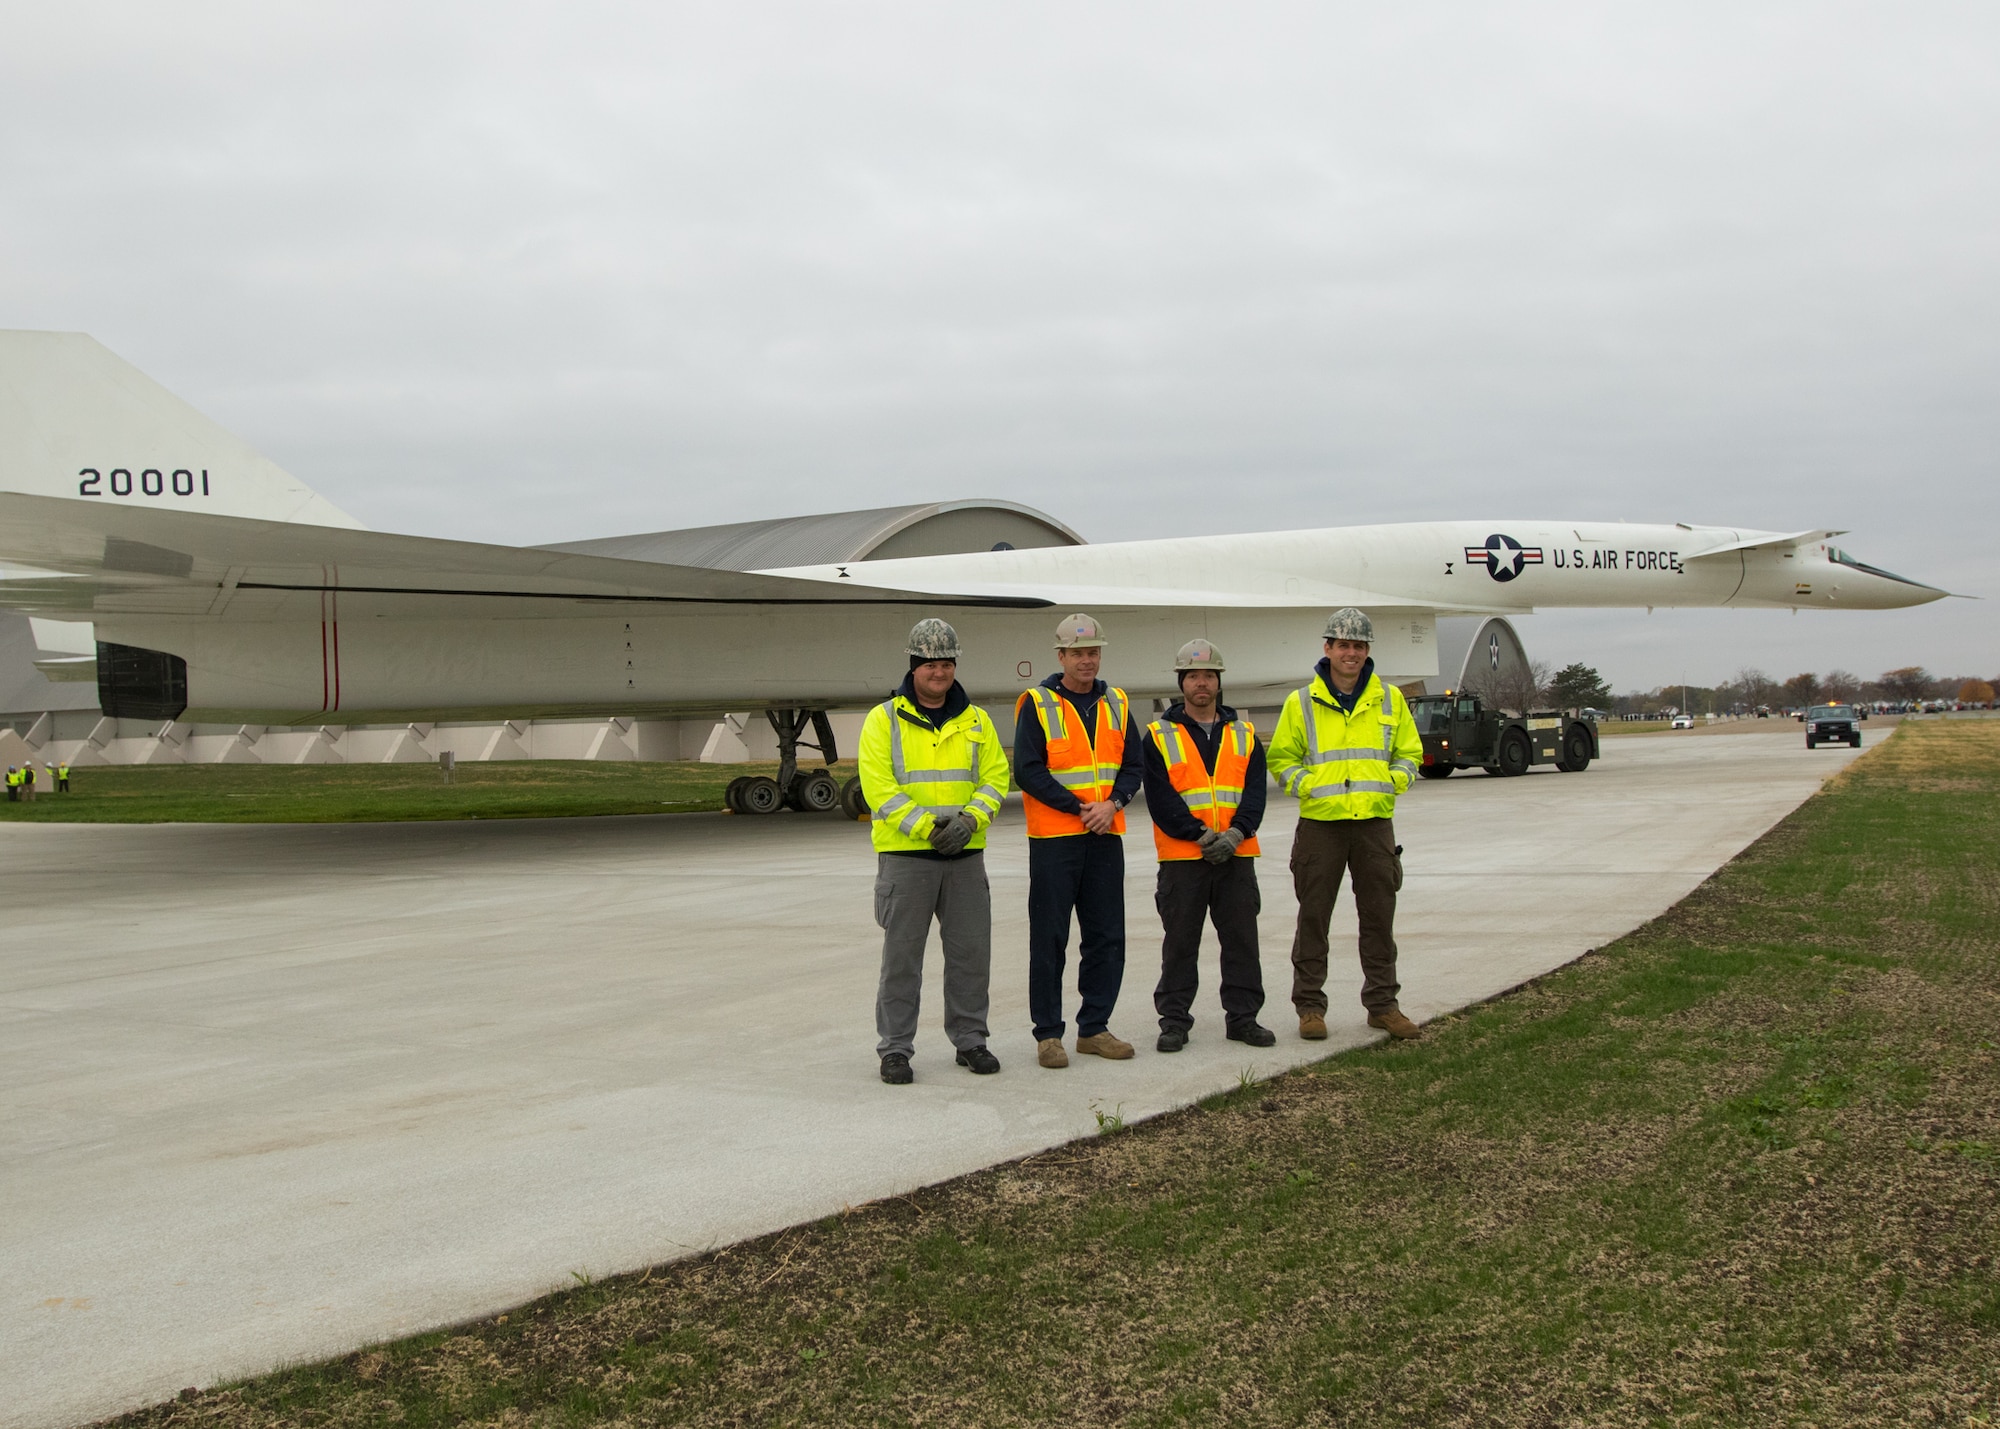 Restoration staff move the North American XB-70 Valkyrie into the new fourth building at the National Museum of the U.S. Air Force on Oct. 27, 2015. (U.S. Air Force photo by Don Popp) 